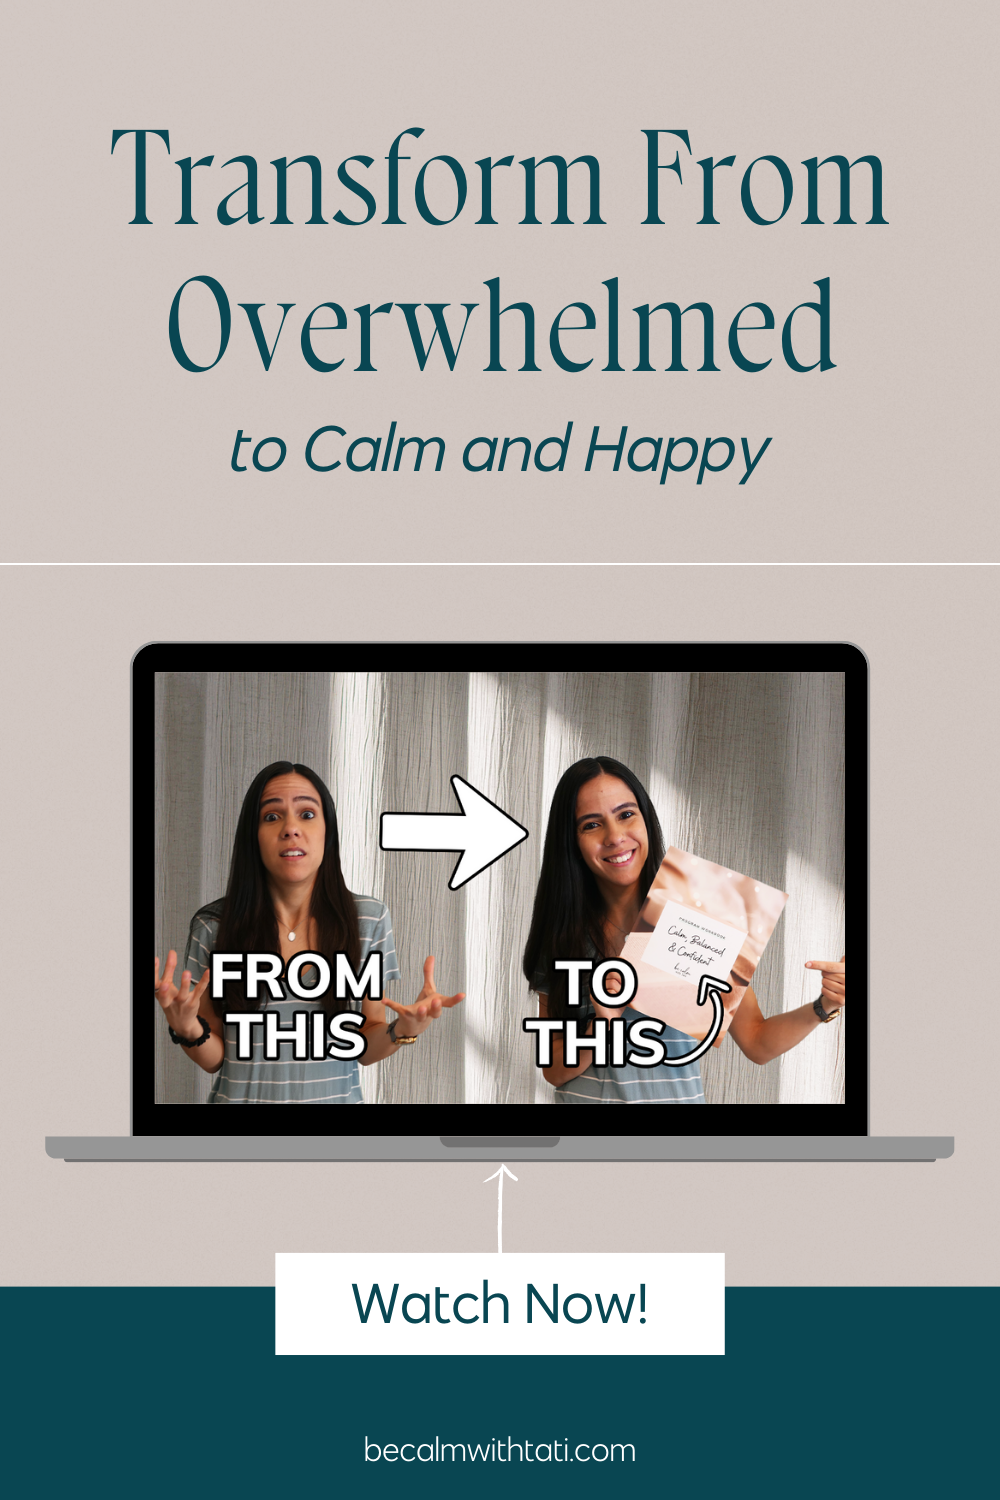 Transform From Overwhelmed to Calm and Happy